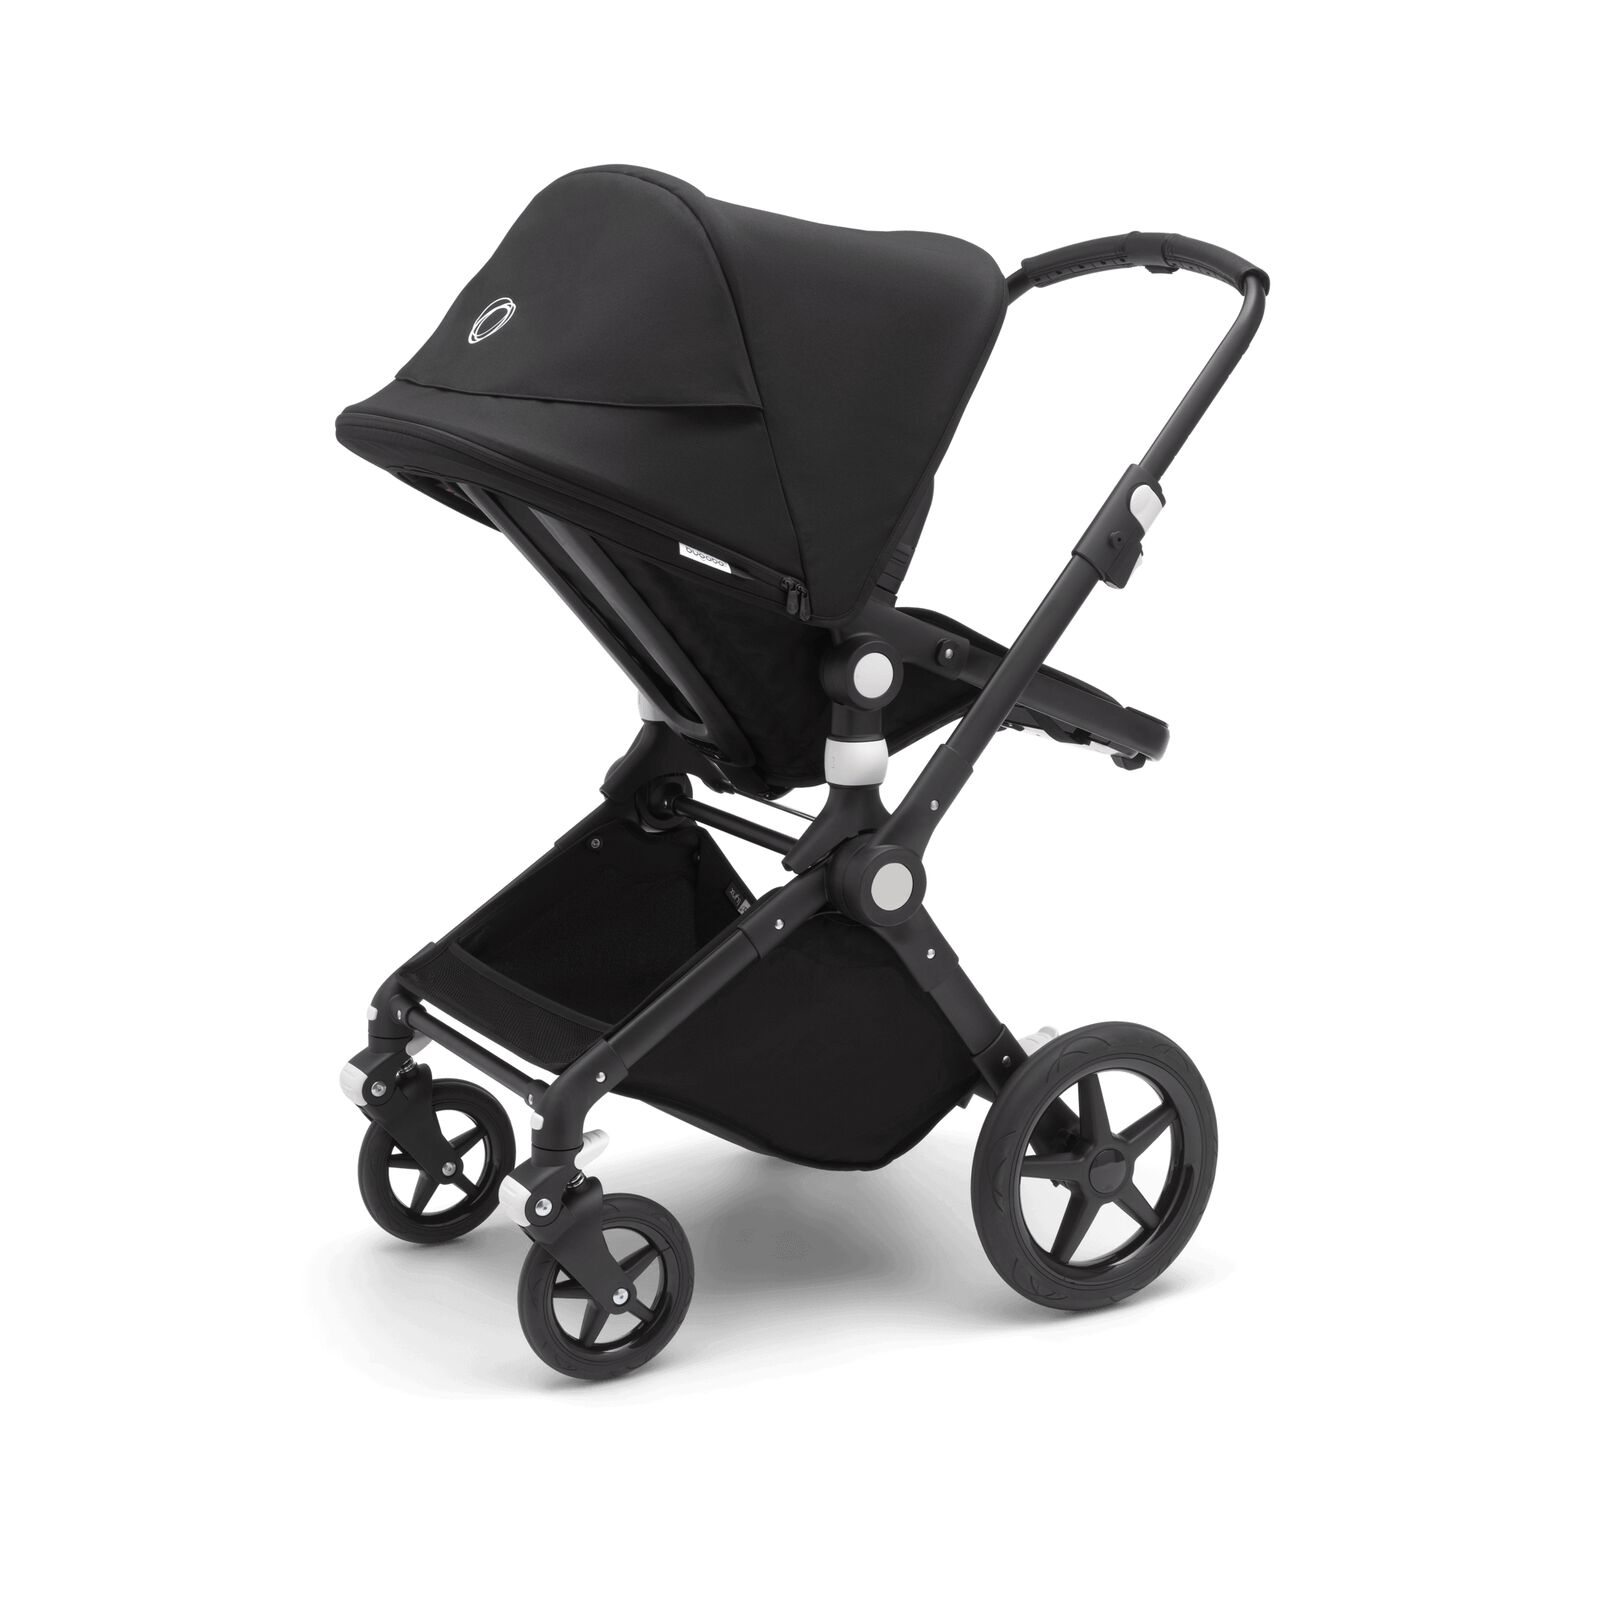 Bugaboo Lynx bassinet and seat stroller